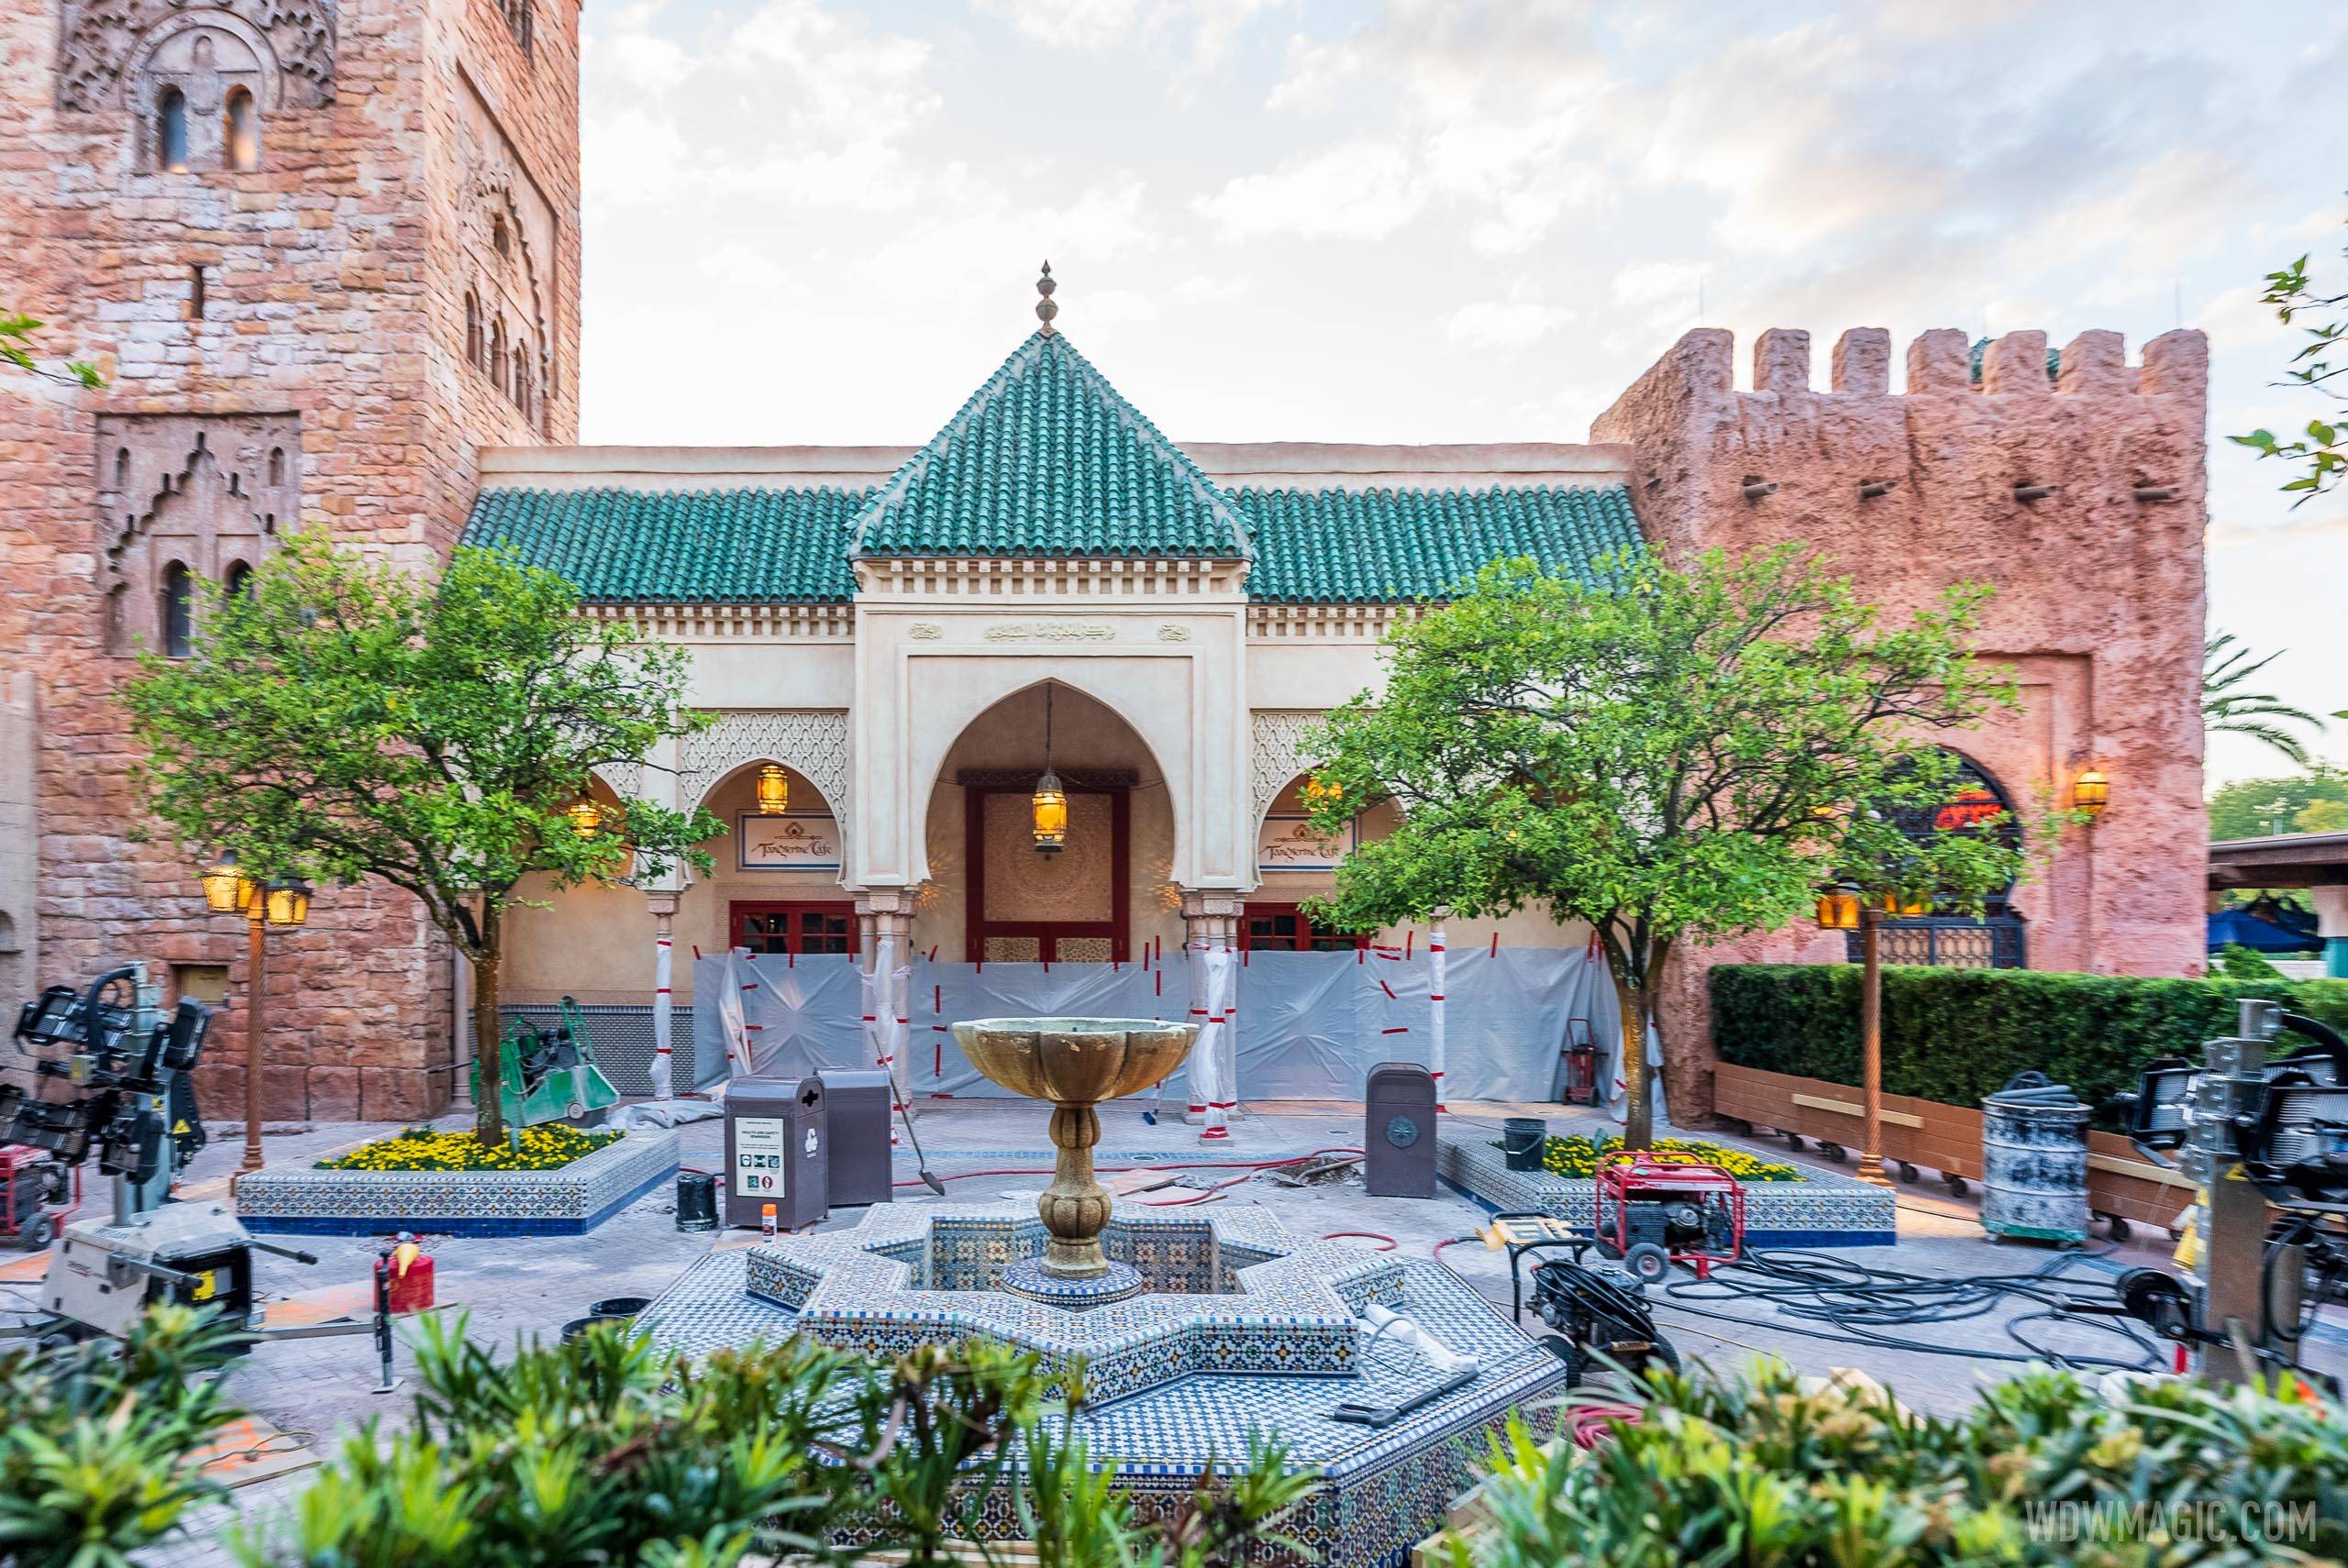 The central courtyard and fountain are behind construction barriers